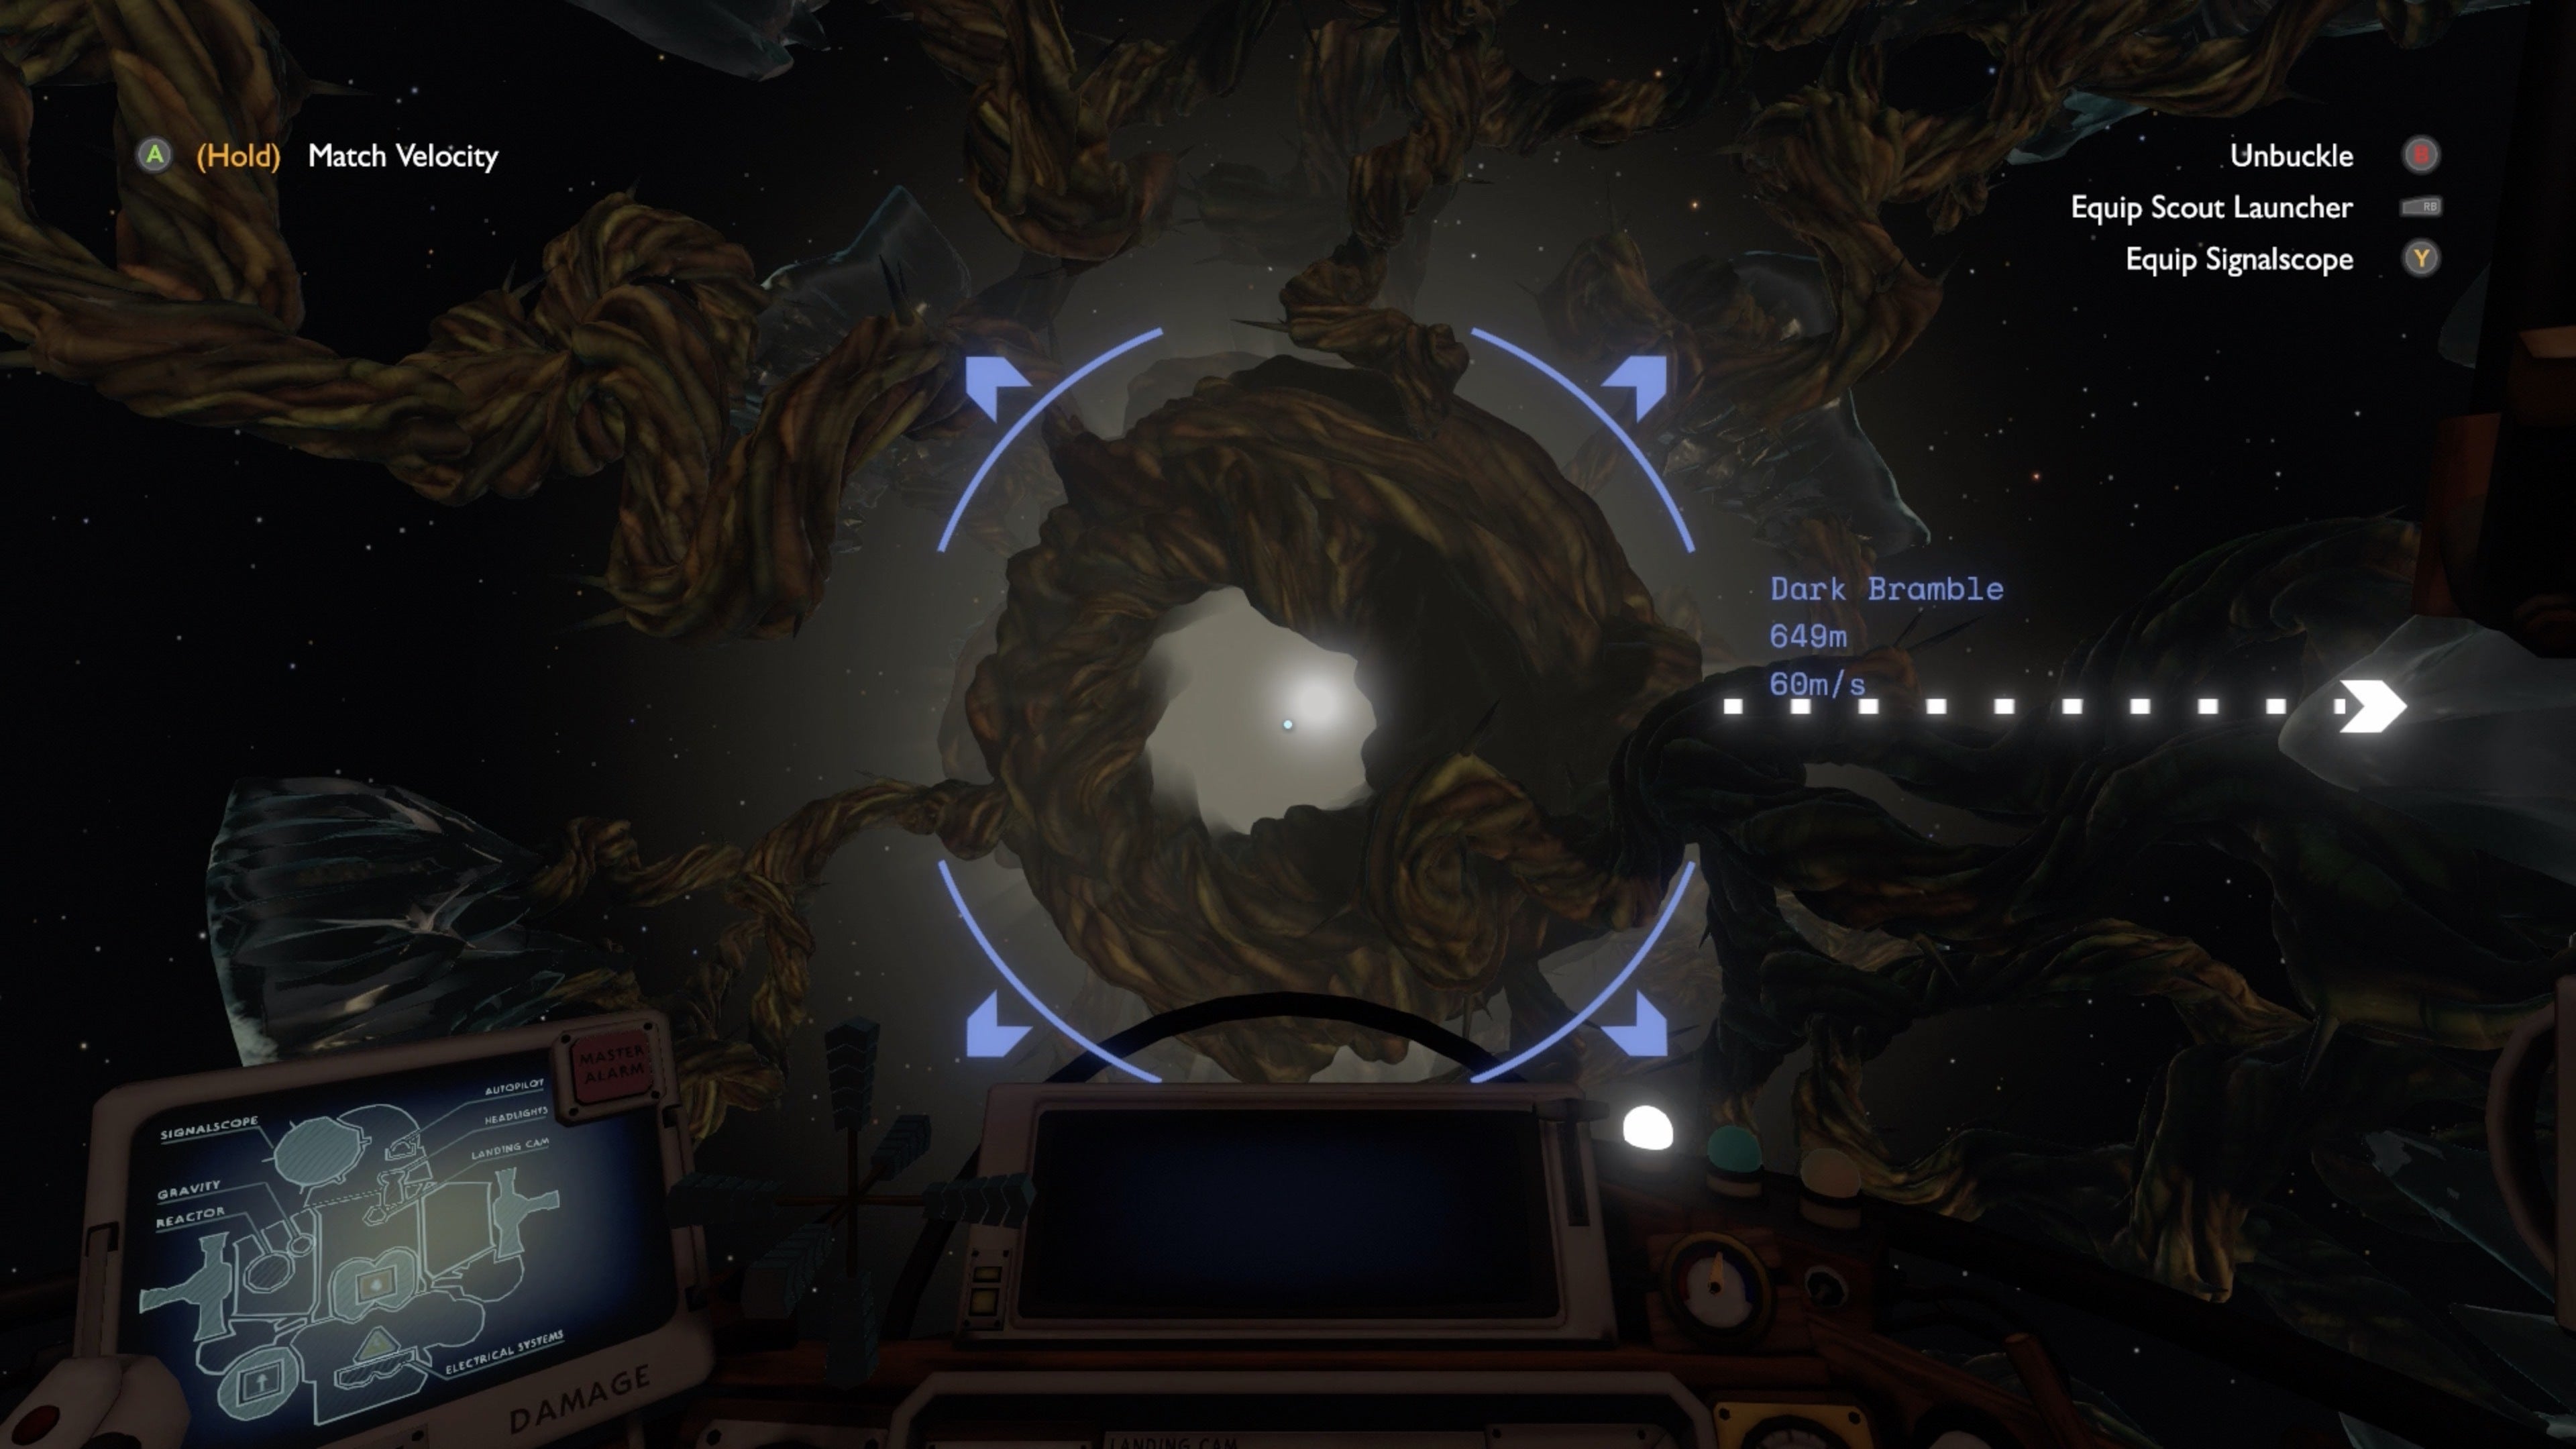 A forboding screenshot of Dark Bramble. It's a broken planet with thorns growing out of it.